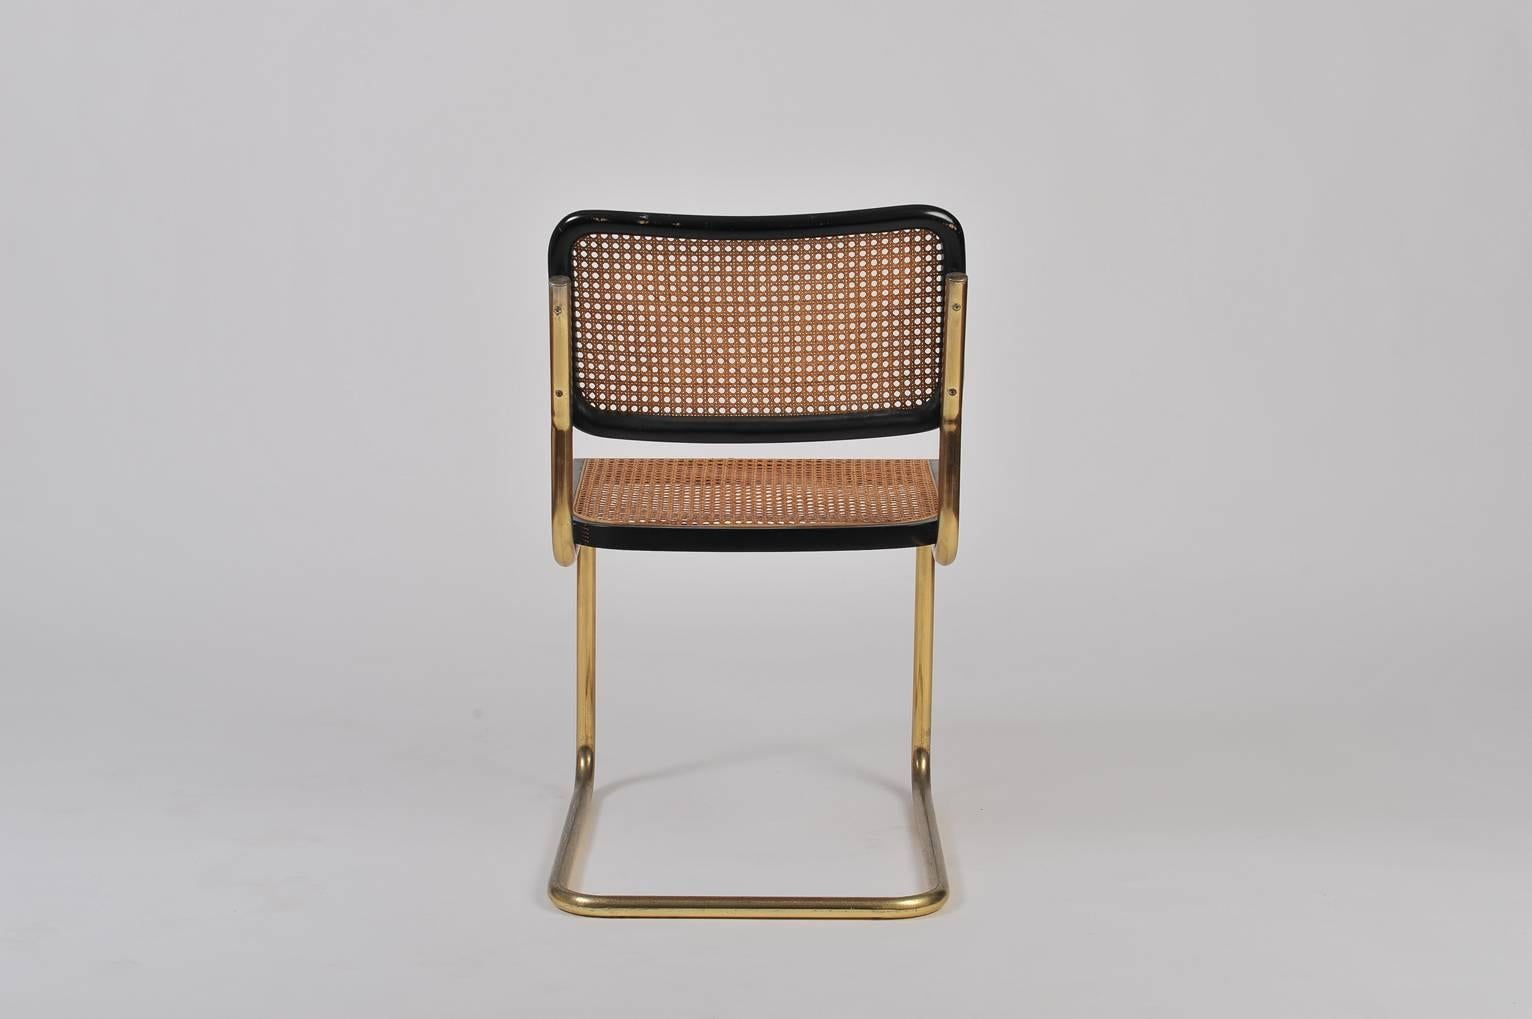 Bauhaus Pair of Gold and Cane Cesca Chairs by Marcel Breuer, 1928